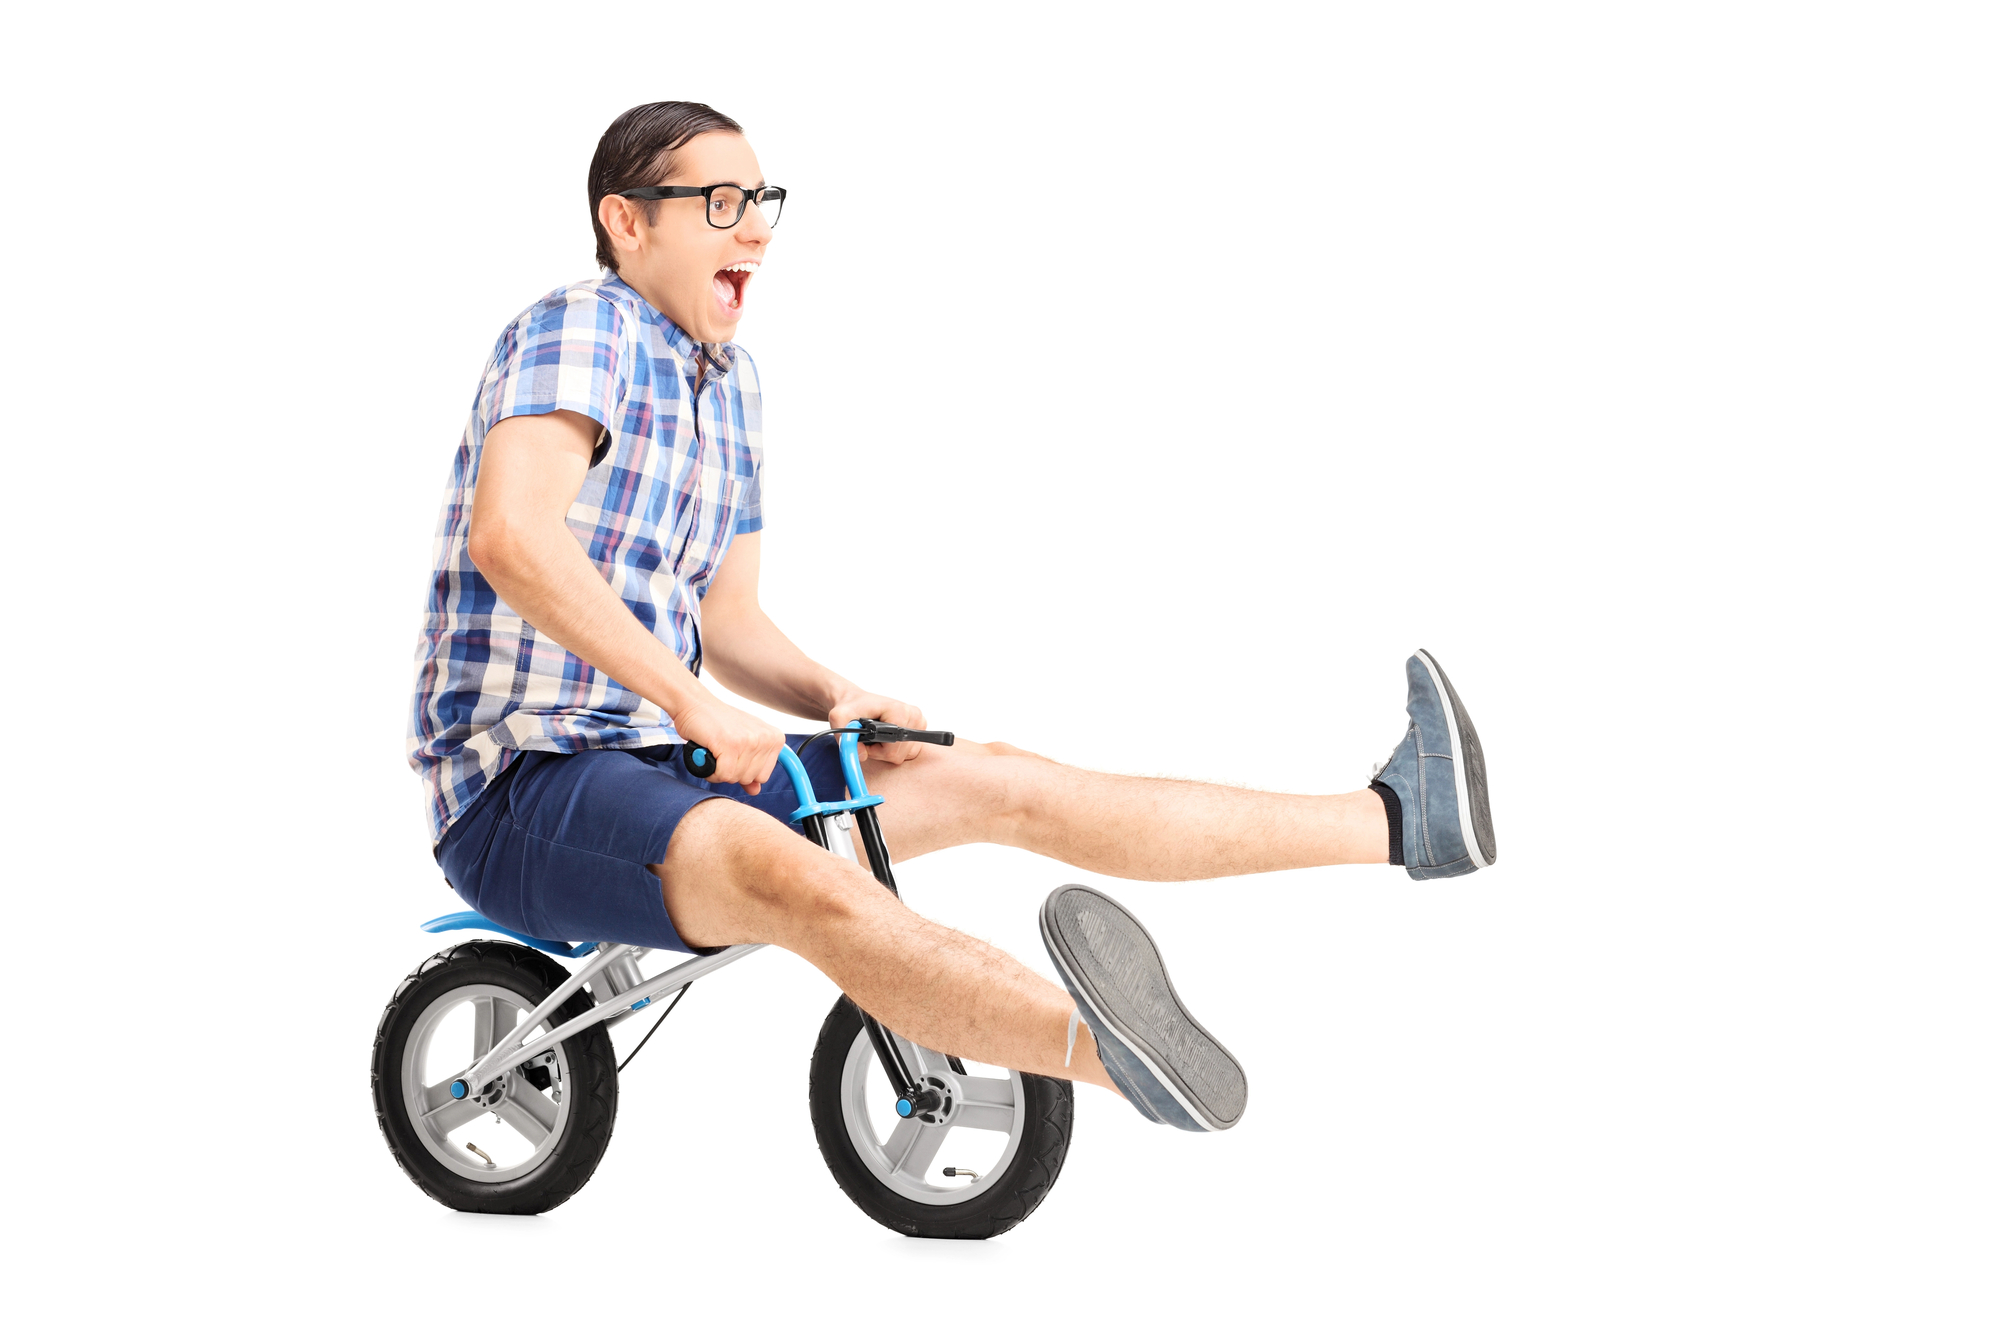 A joyful man in glasses and a plaid shirt rides a small children's bike. He has his legs extended forward with excitement and is wearing casual shorts and shoes. The background is plain white, highlighting his playful expression and the humor of the situation.